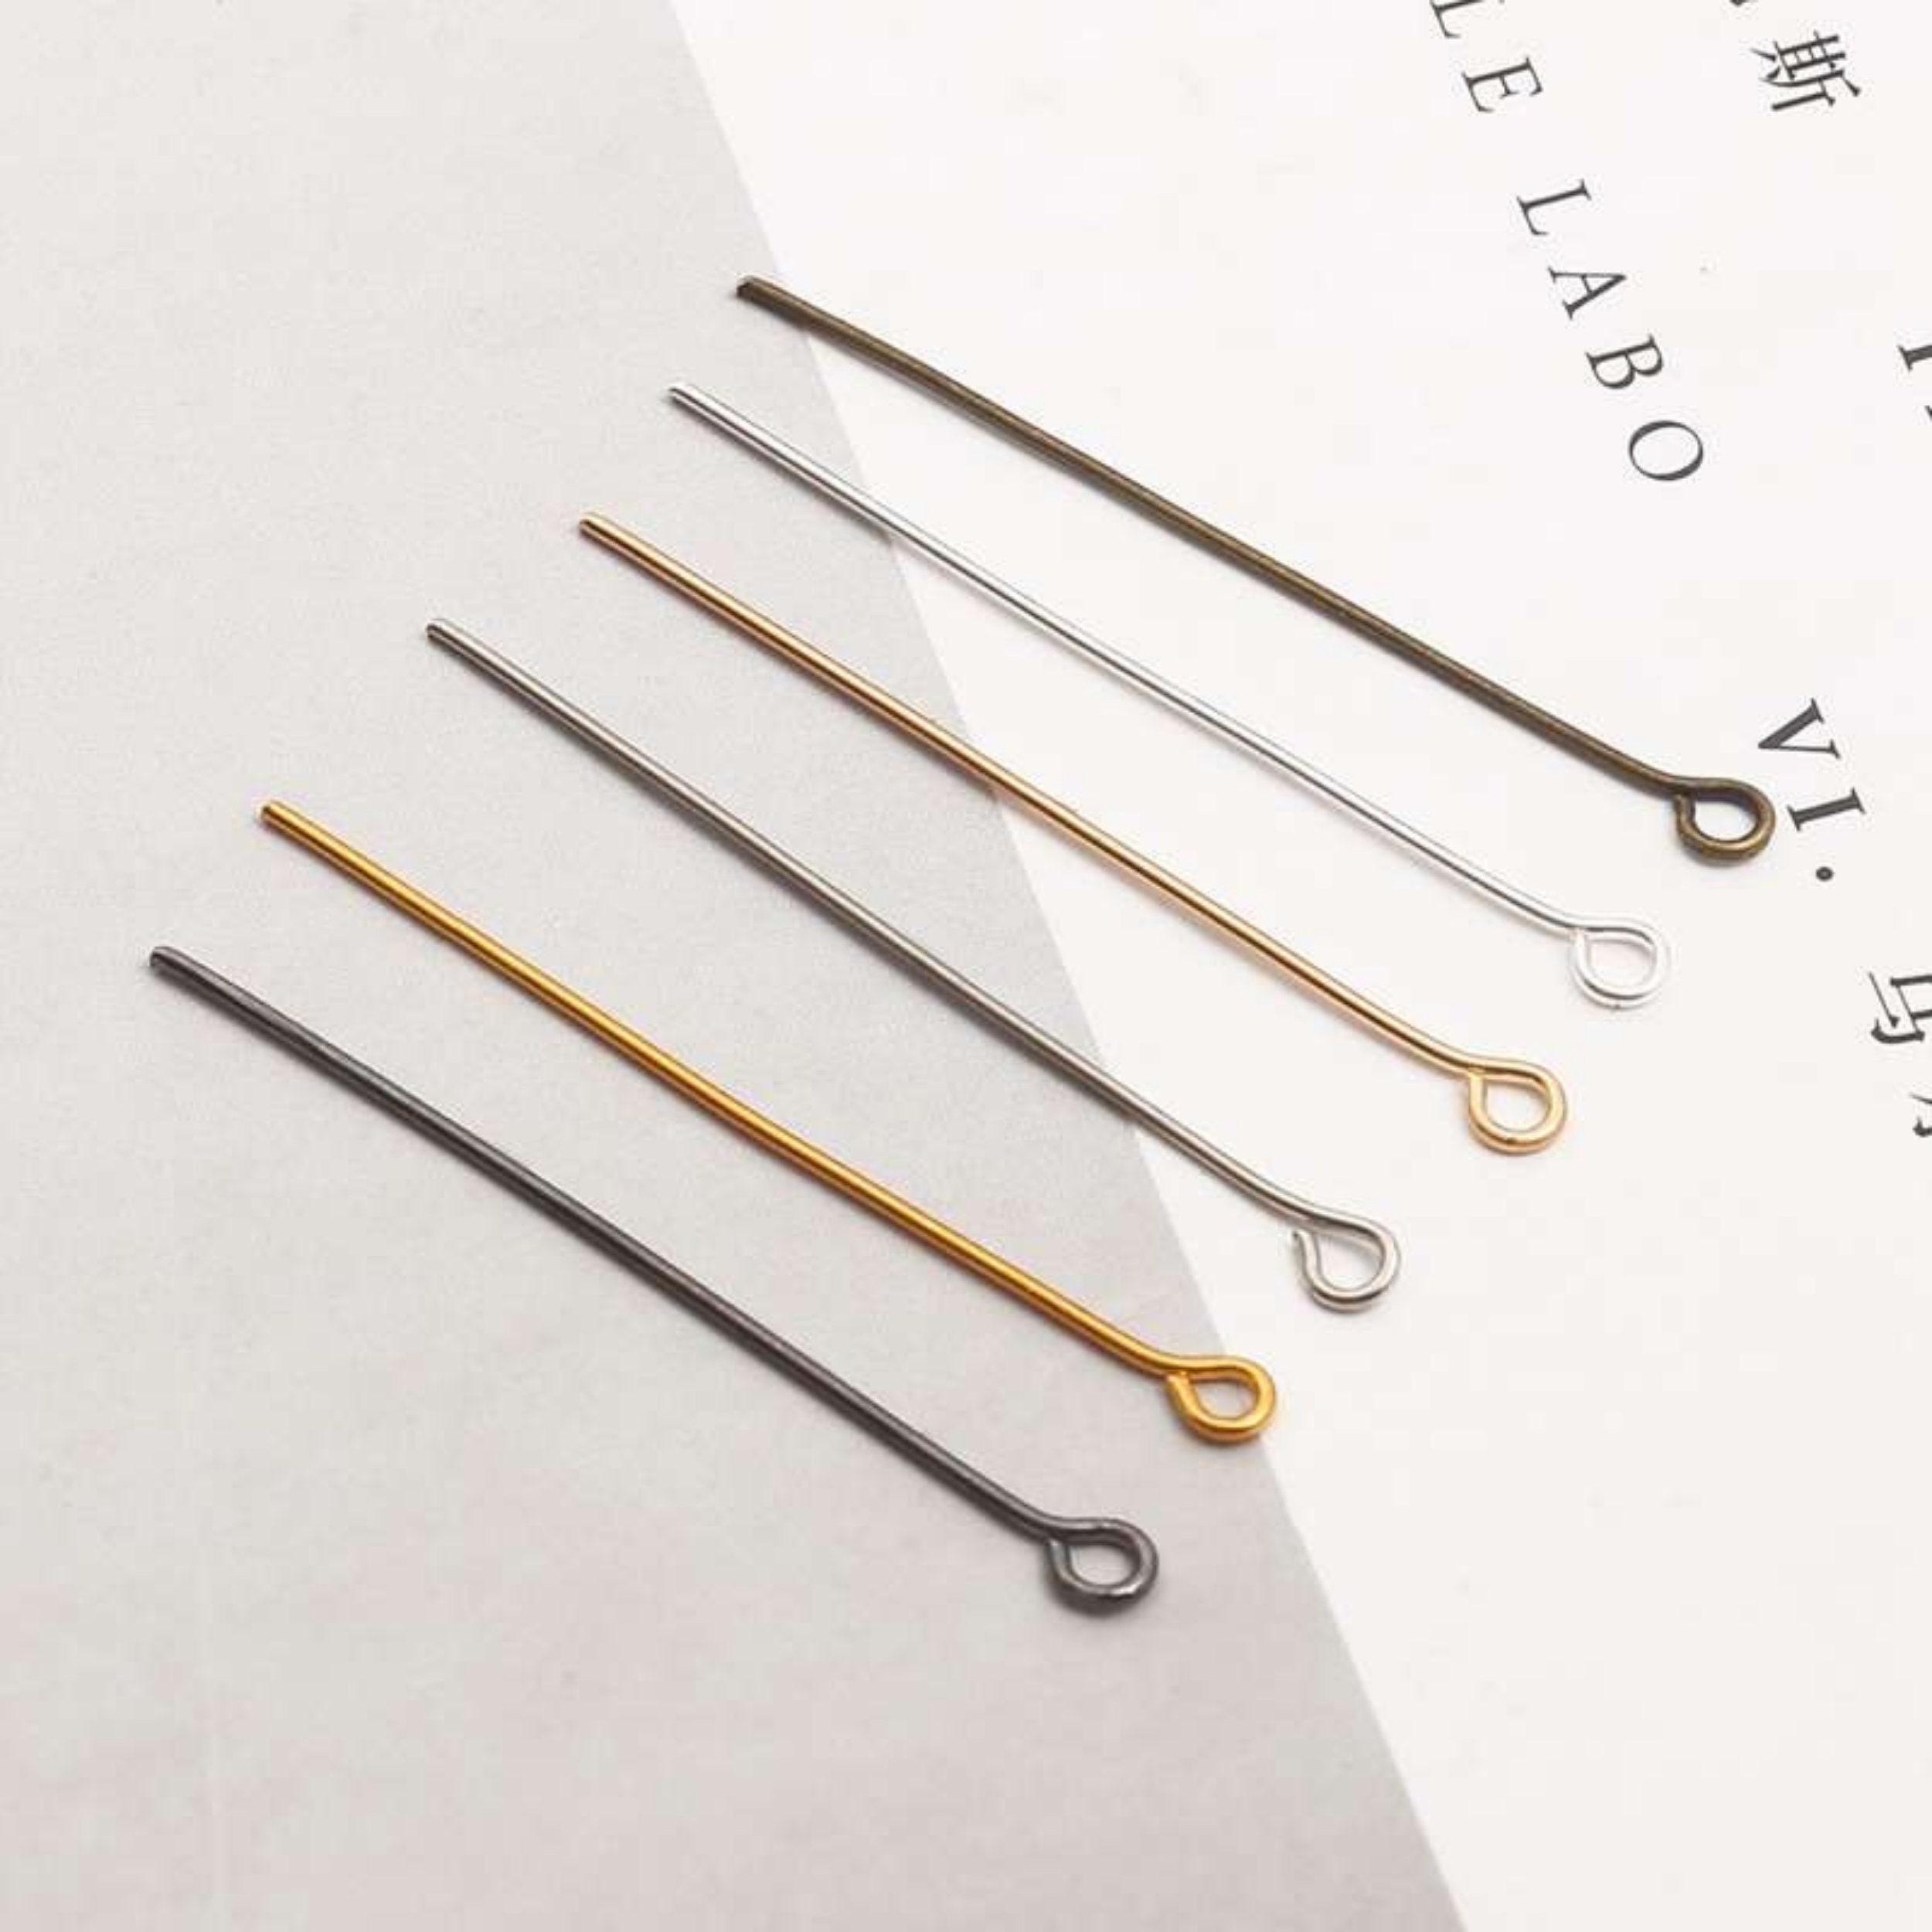 200Pcs Eye Pins Jewelry Making 21 Gauge 35mm 0.7mm Wire Iron Red Copper